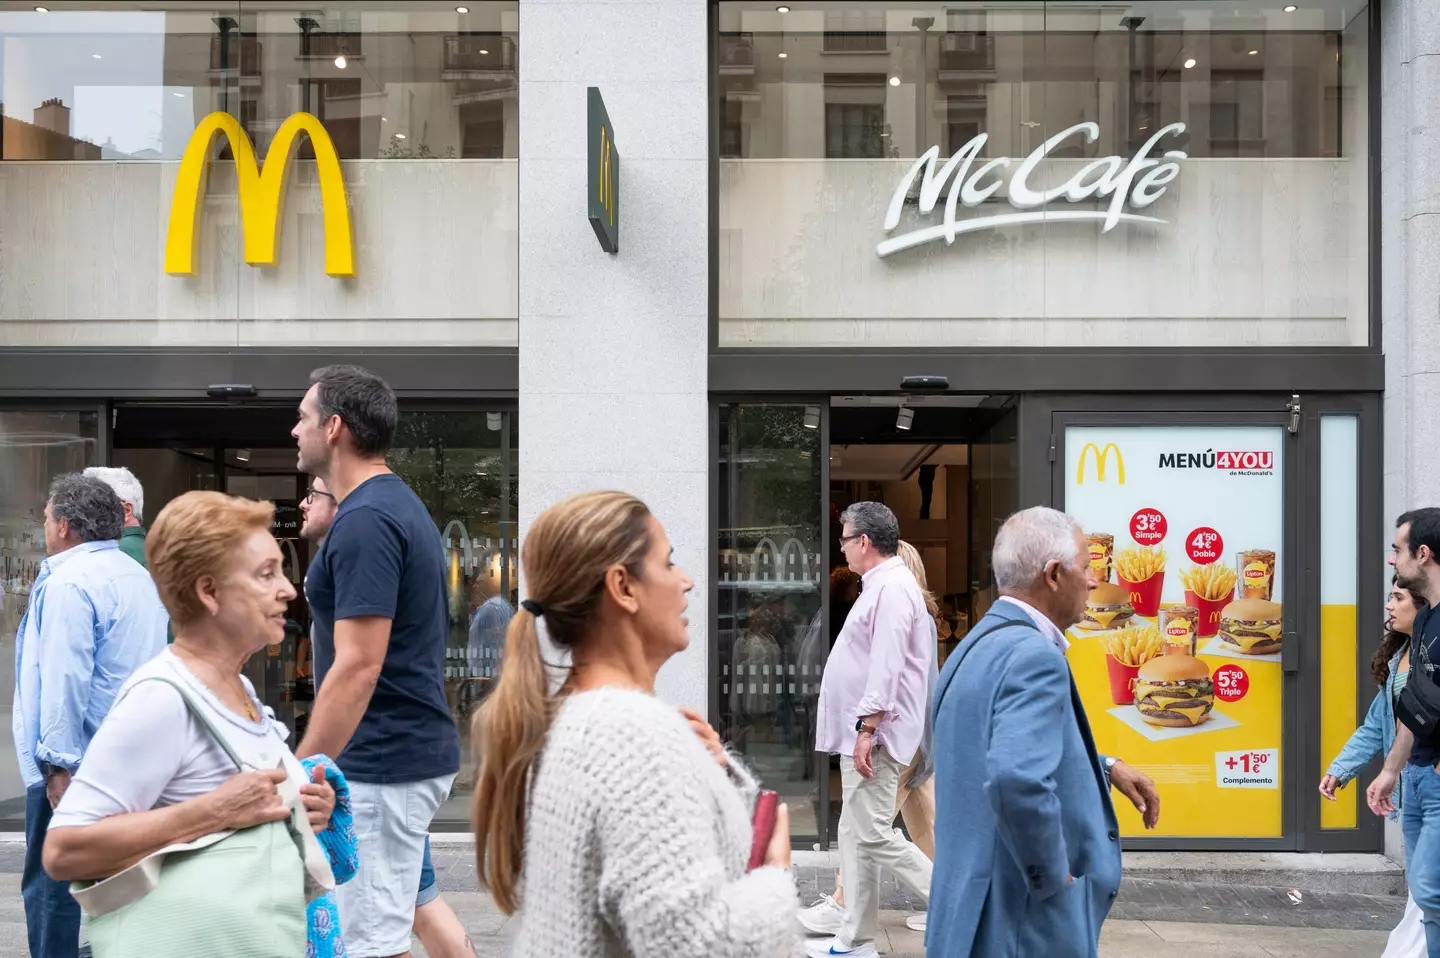 McDonald's has become renowned for its cheap prices.